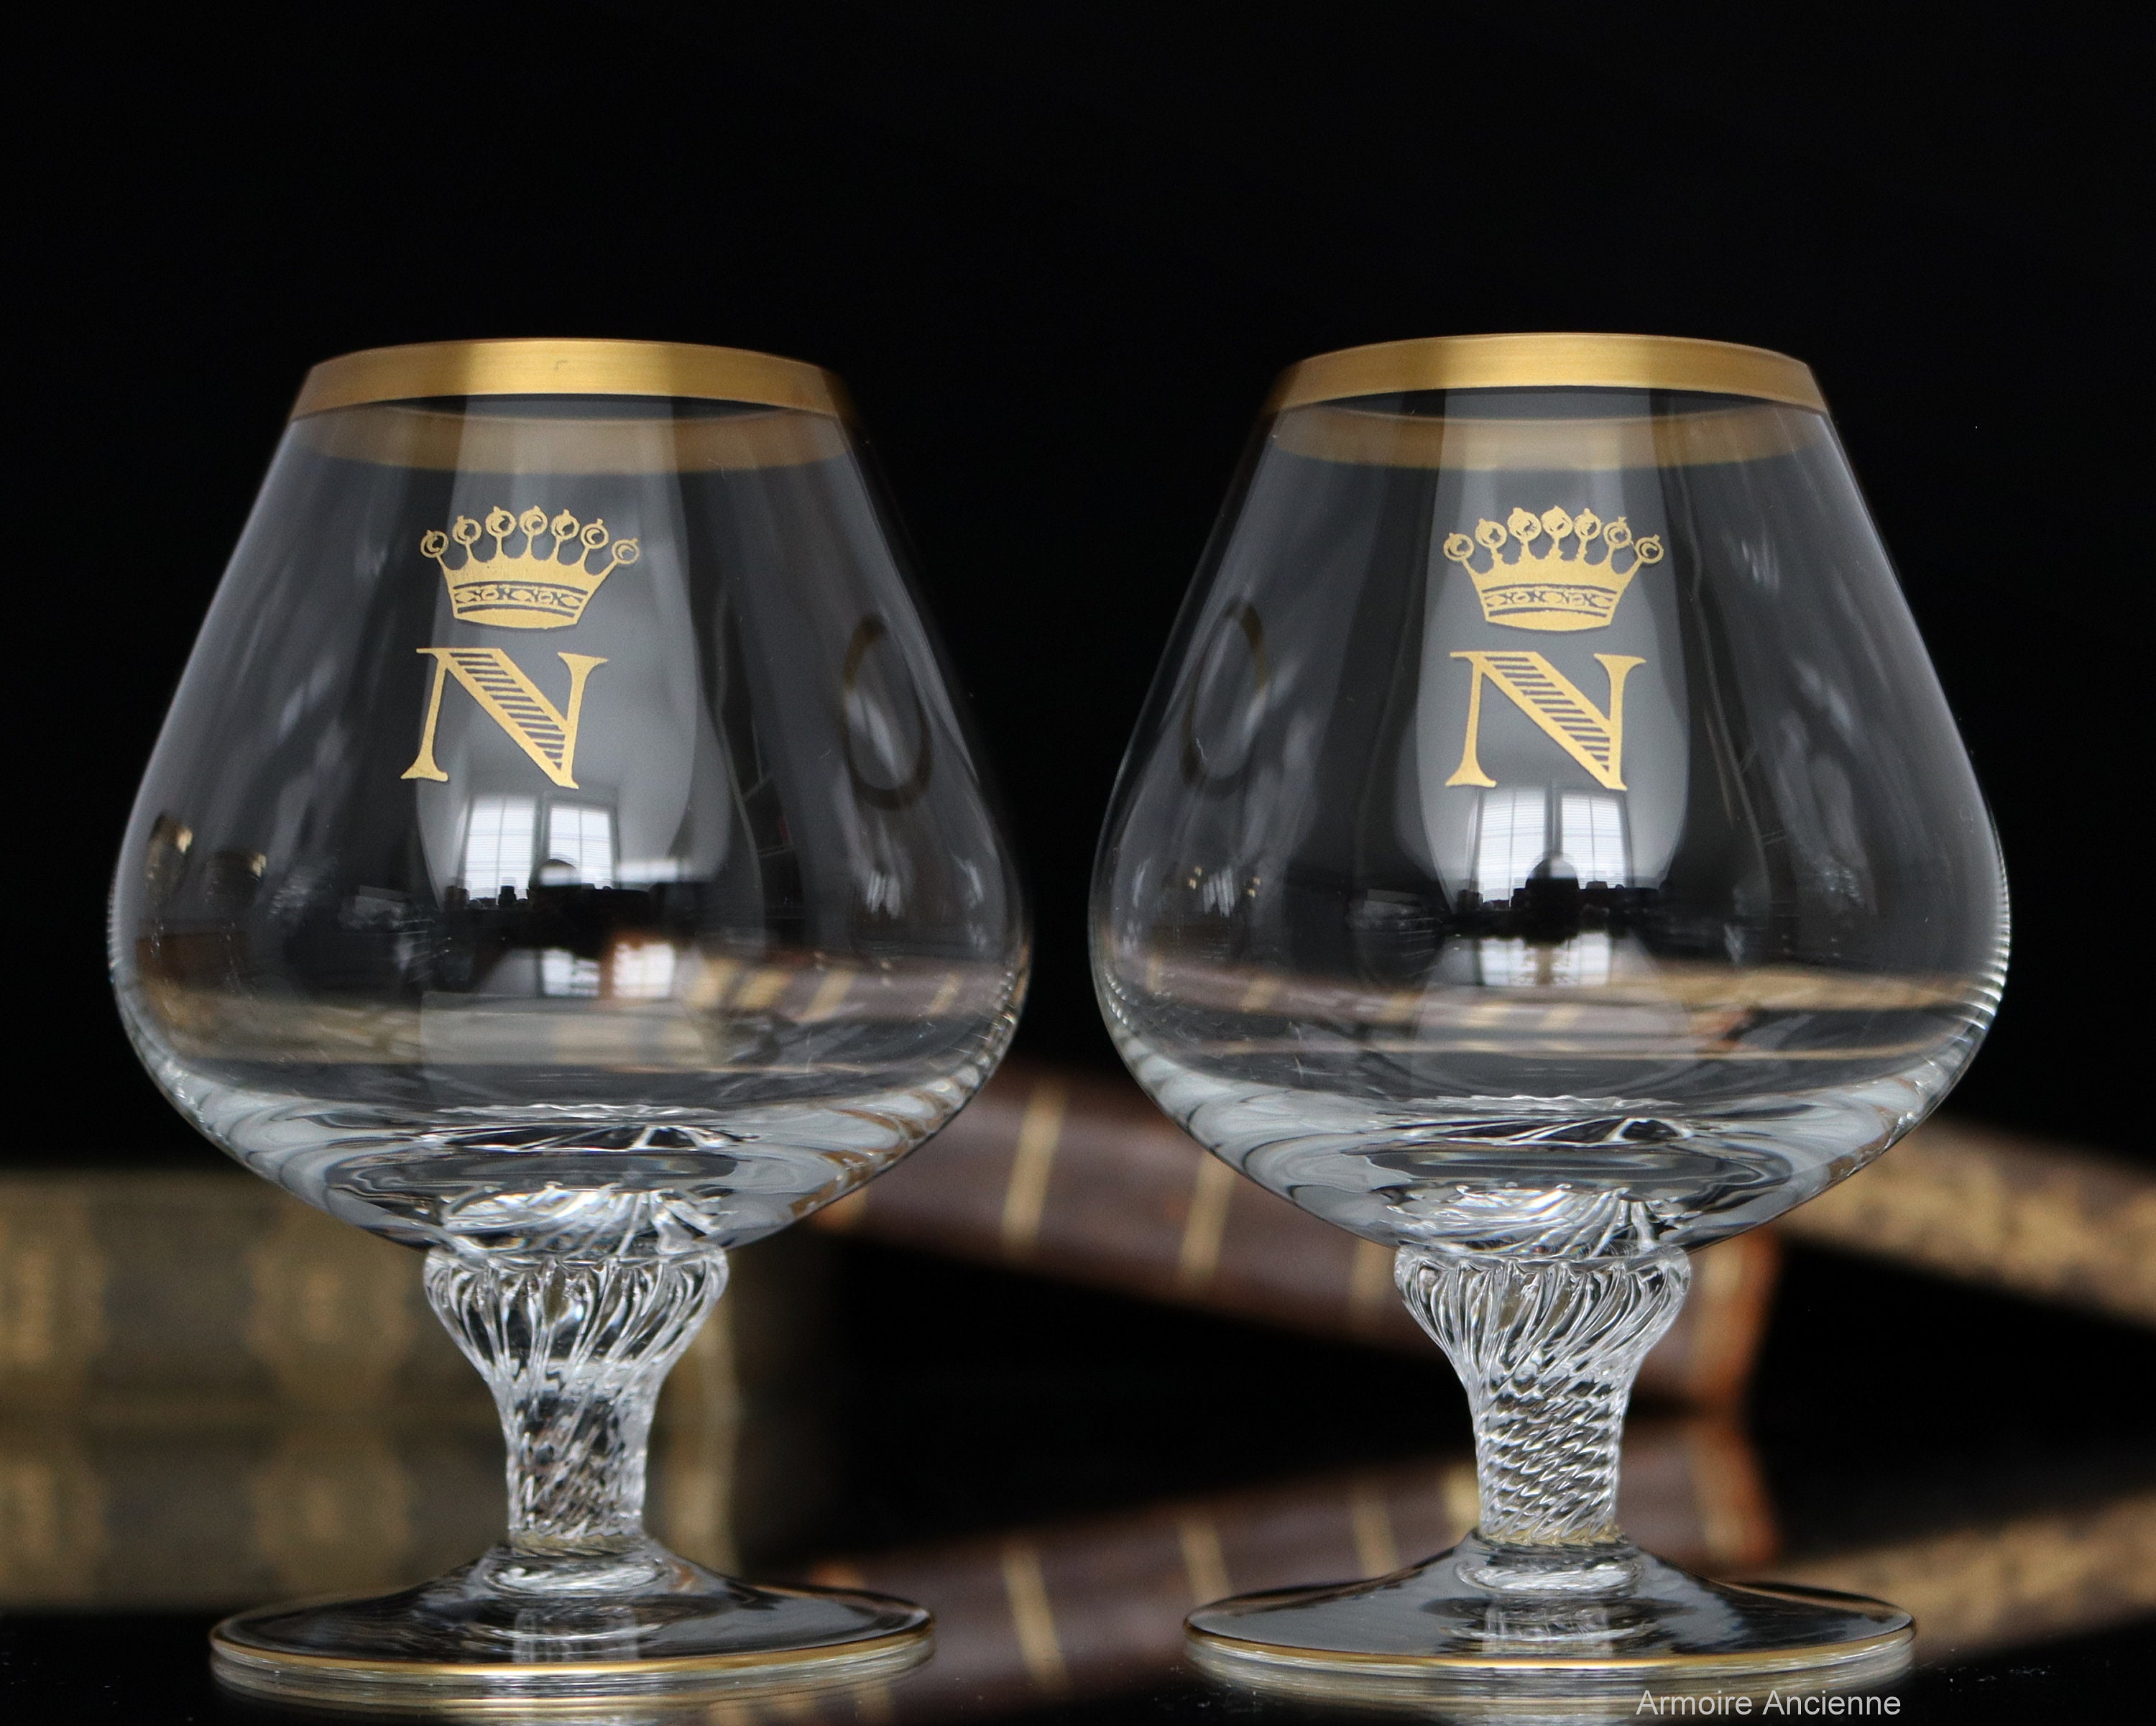 Set of 2 Hand Made Vintage Crystal Glasses, Brandy & Cognac Snifter with  24K Gold Rim, Old-Fashioned Glassware, 7 fluid ounces